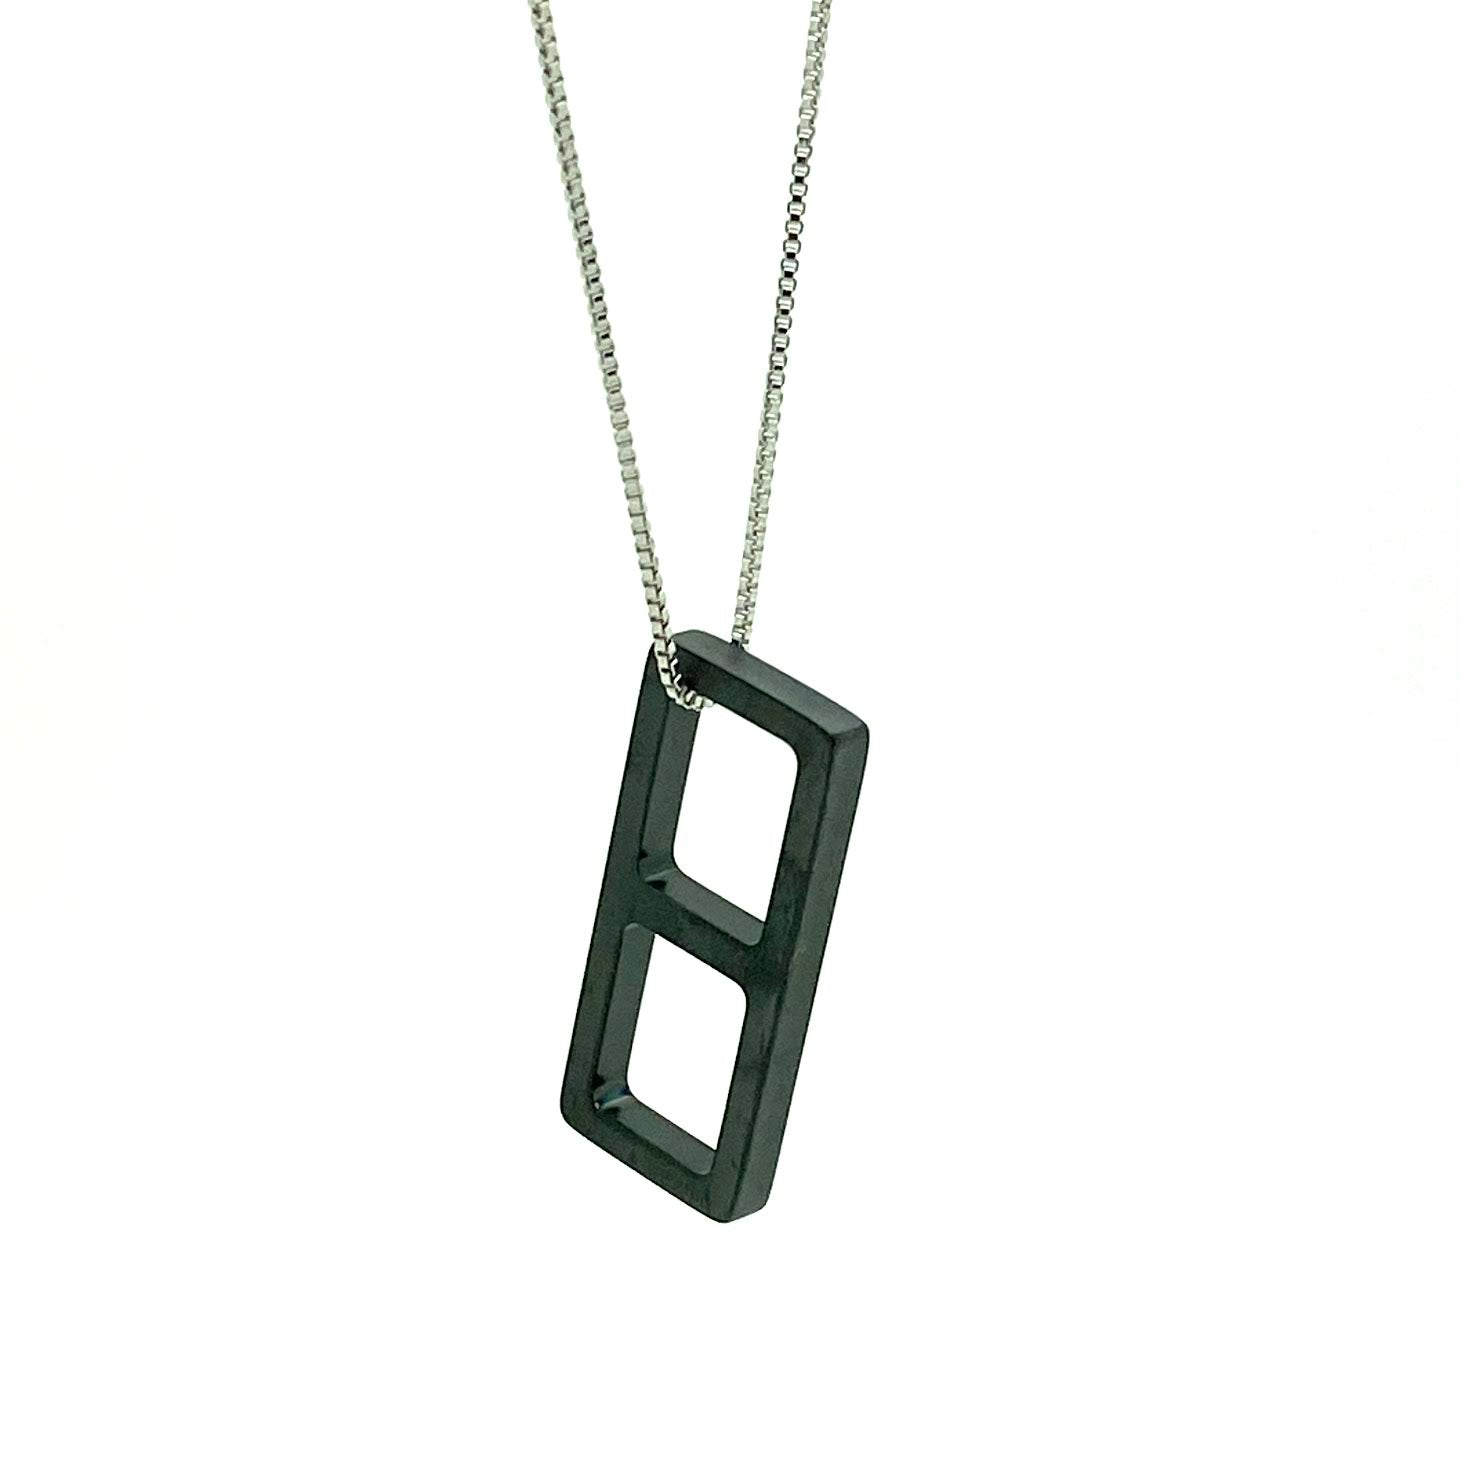 This meticulously designed with a geometrical flavor, this brushed black ceramic pendant necklace is perfect worn alone or paired with a WristBend stacking bracelet. Made by WristBend